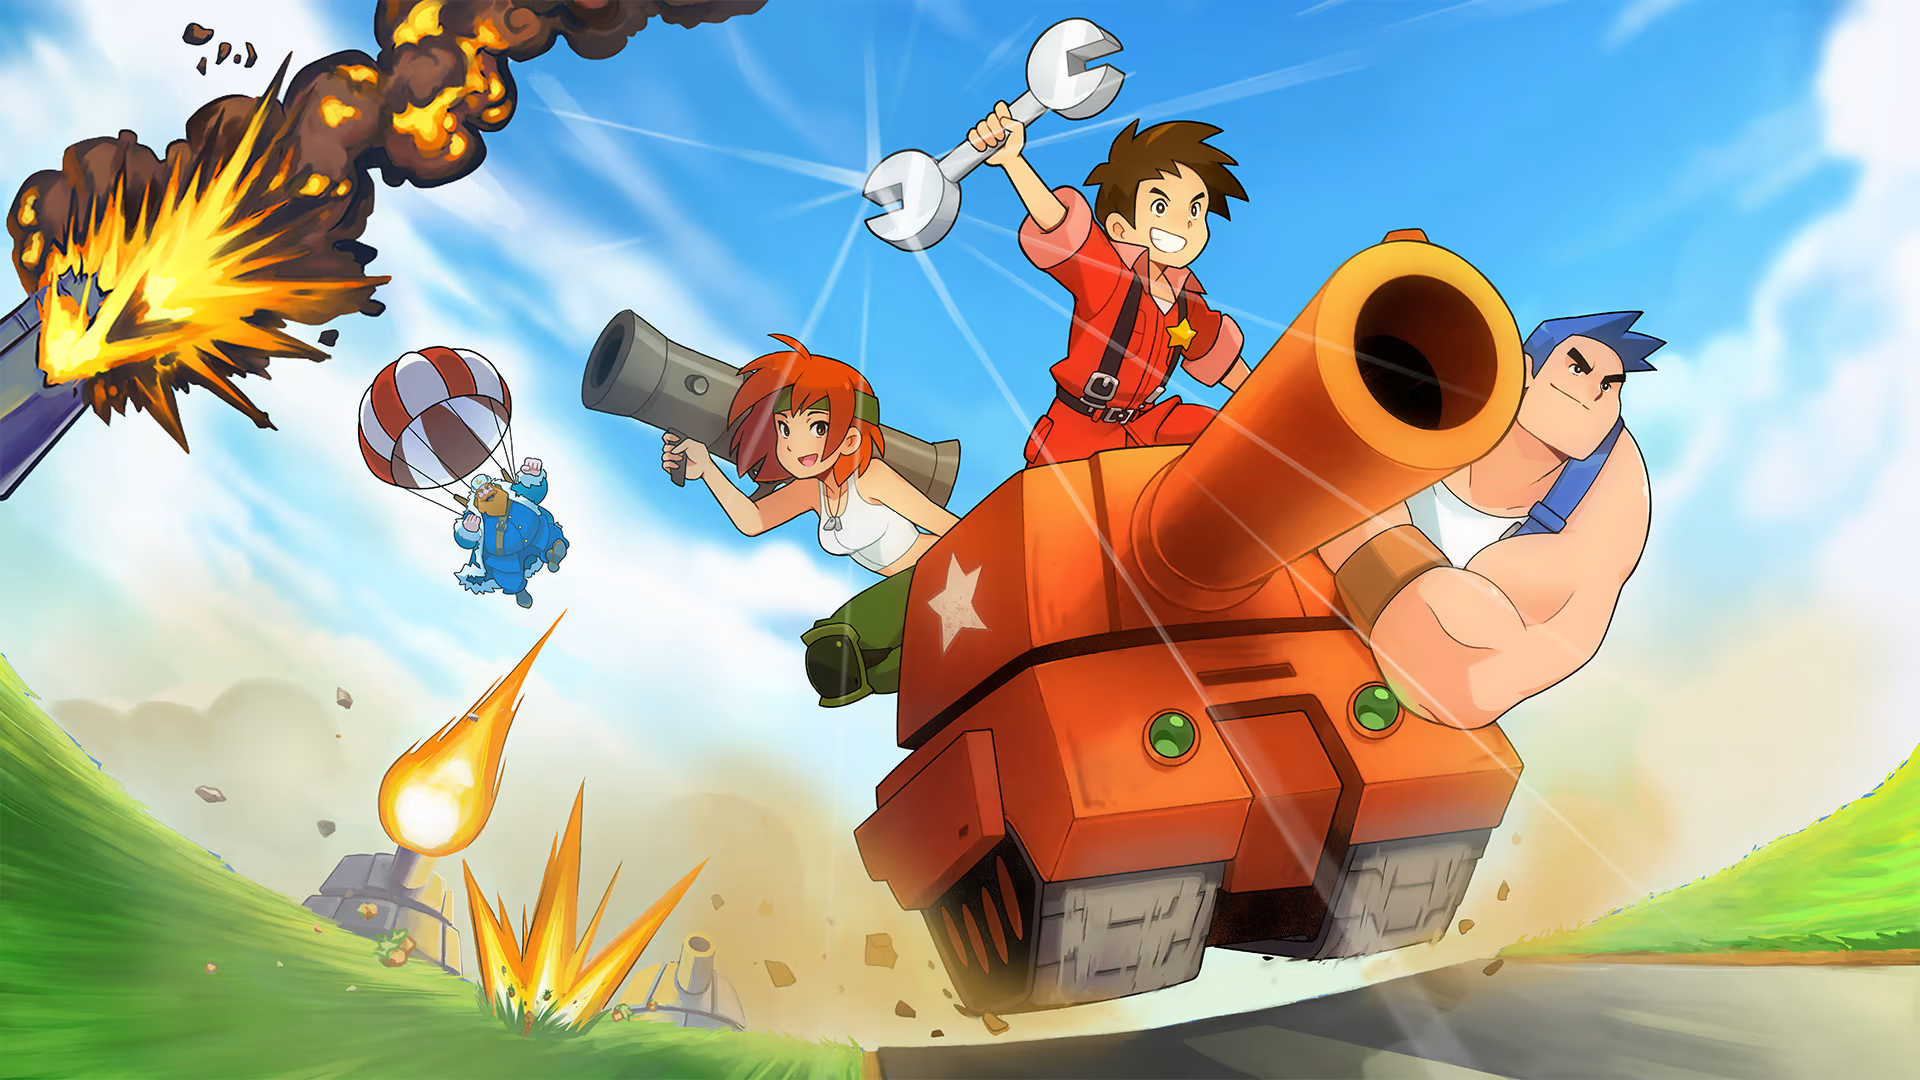 Advance Wars 2: Andy's Adventure